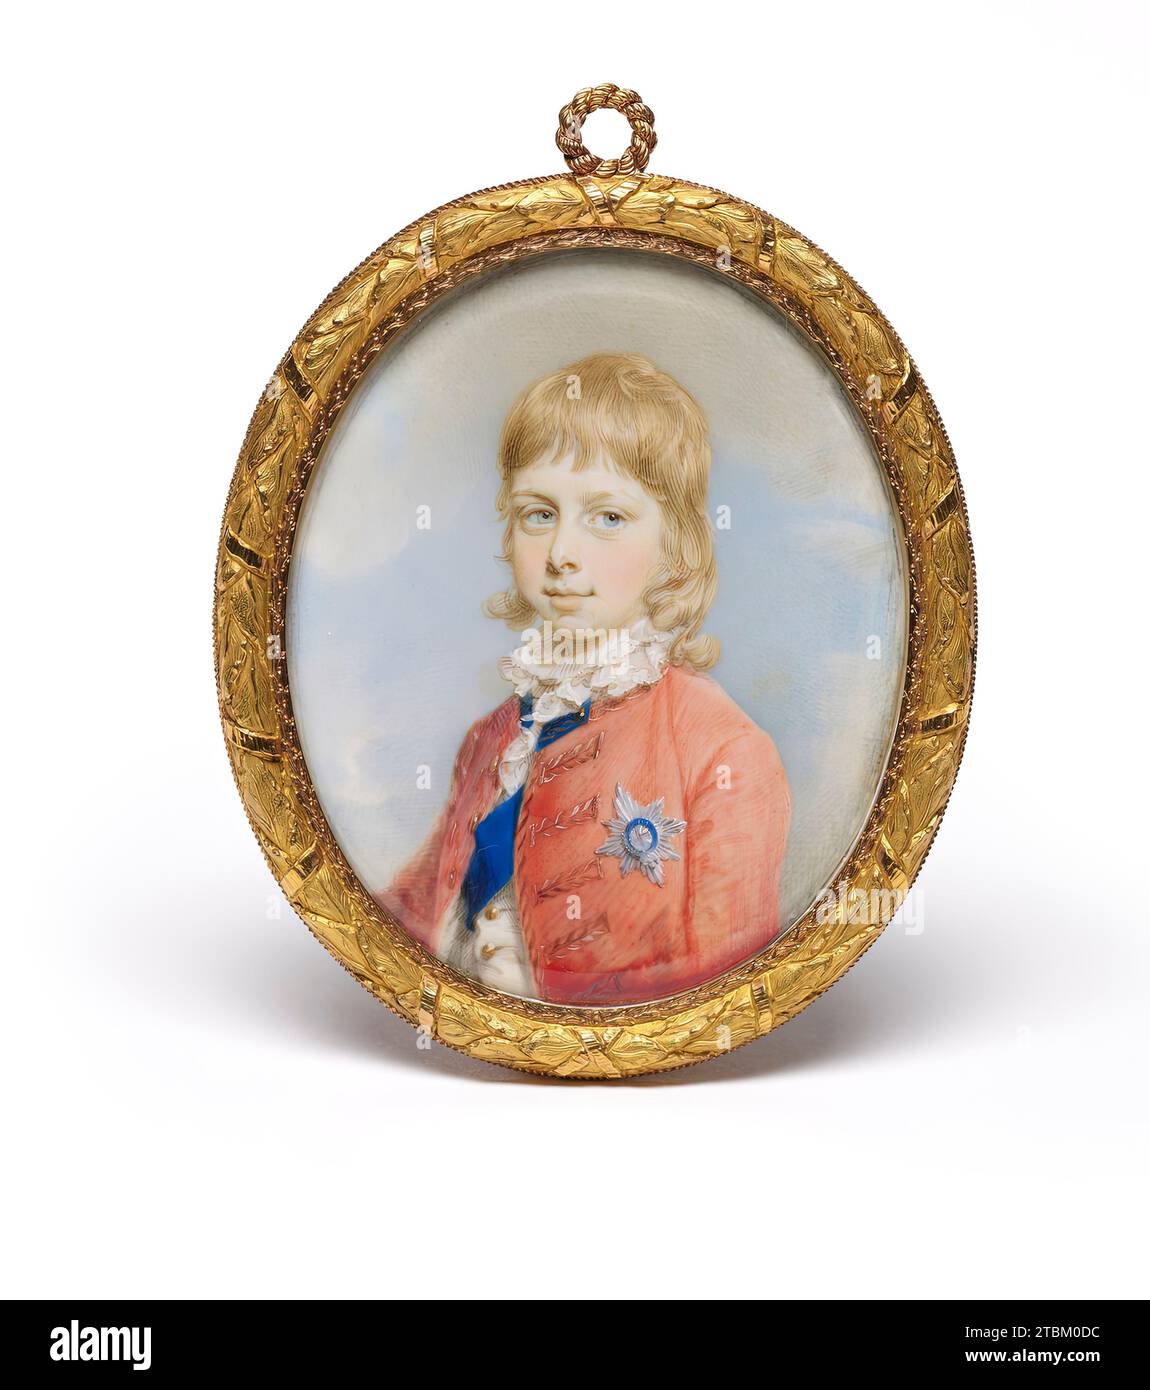 Portrait of George, Prince of Wales, c1773. George, Prince of Wales (1762-1830) was the eldest son of of George III, and in 1811 was declared Regent after his father became mad. He was later crowded George IV, and ruled until 1830. Stock Photo